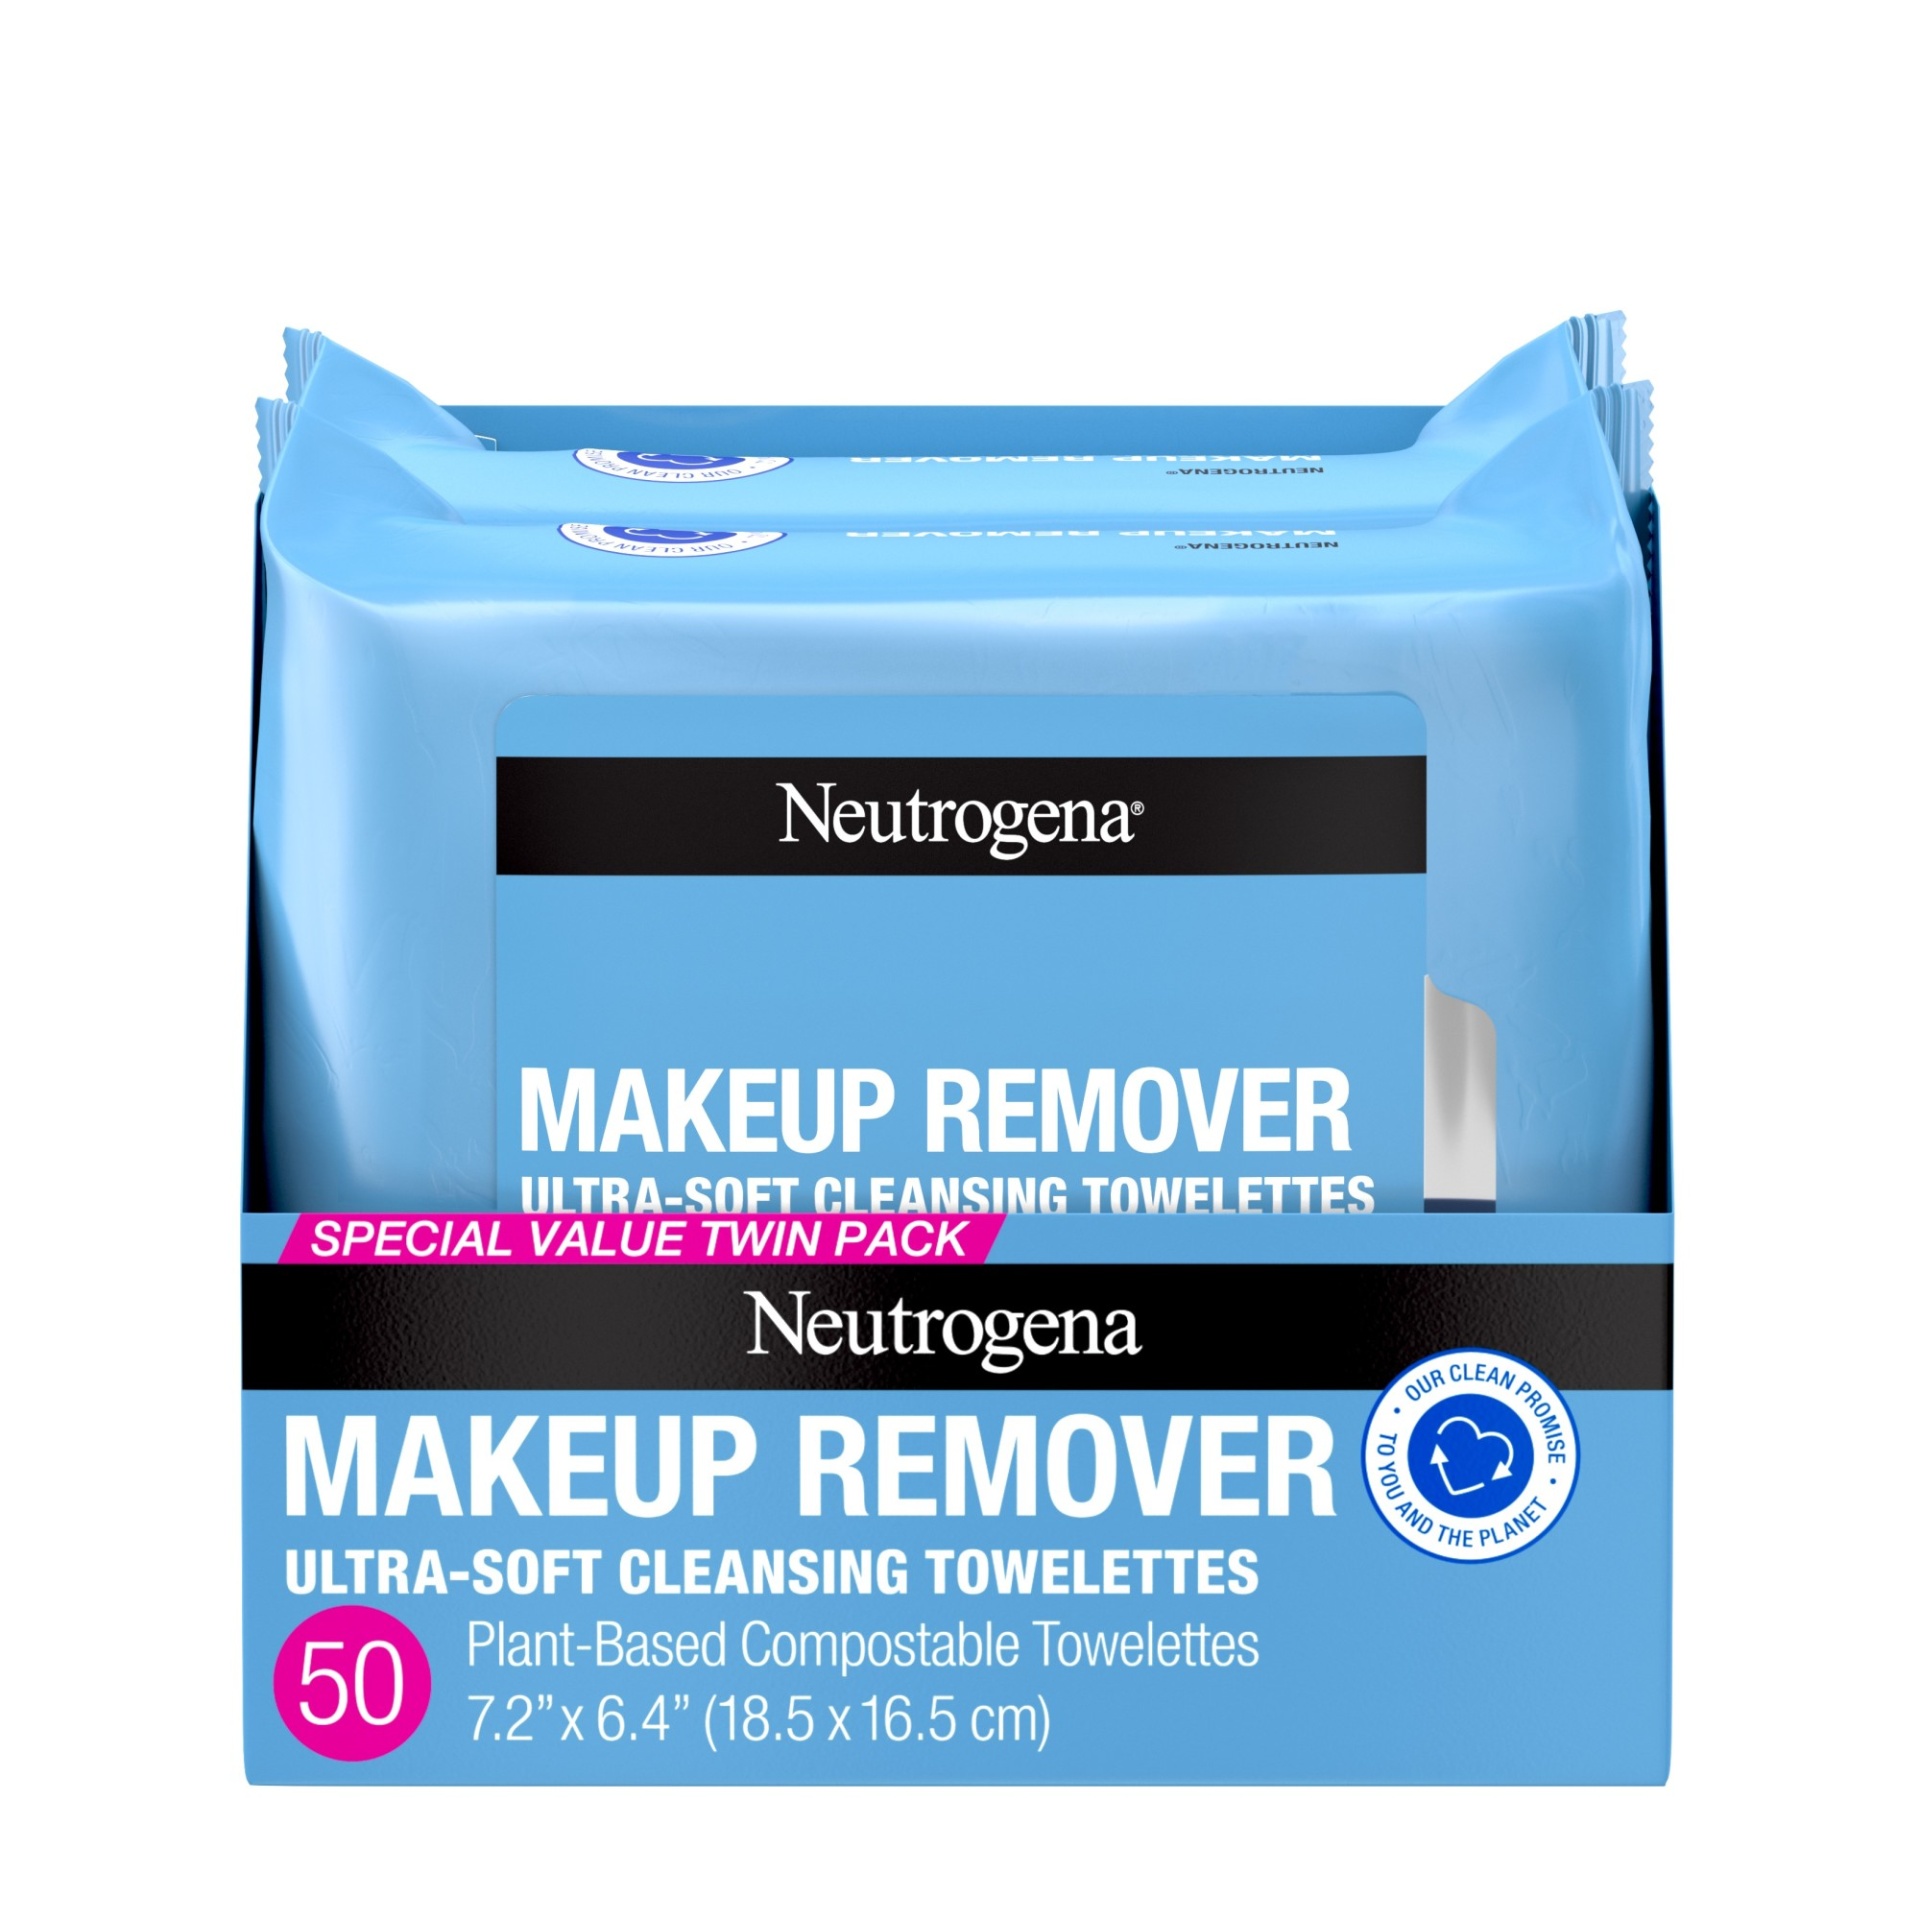 slide 1 of 2, Neutrogena Makeup Remover Cleansing Face Wipes, Daily Cleansing Facial Towelettes Remove Makeup & Waterproof Mascara, Alcohol-Free, 100% Plant-Based Fibers, Value Twin Pack, 25 count, 25 ct; 2 ct